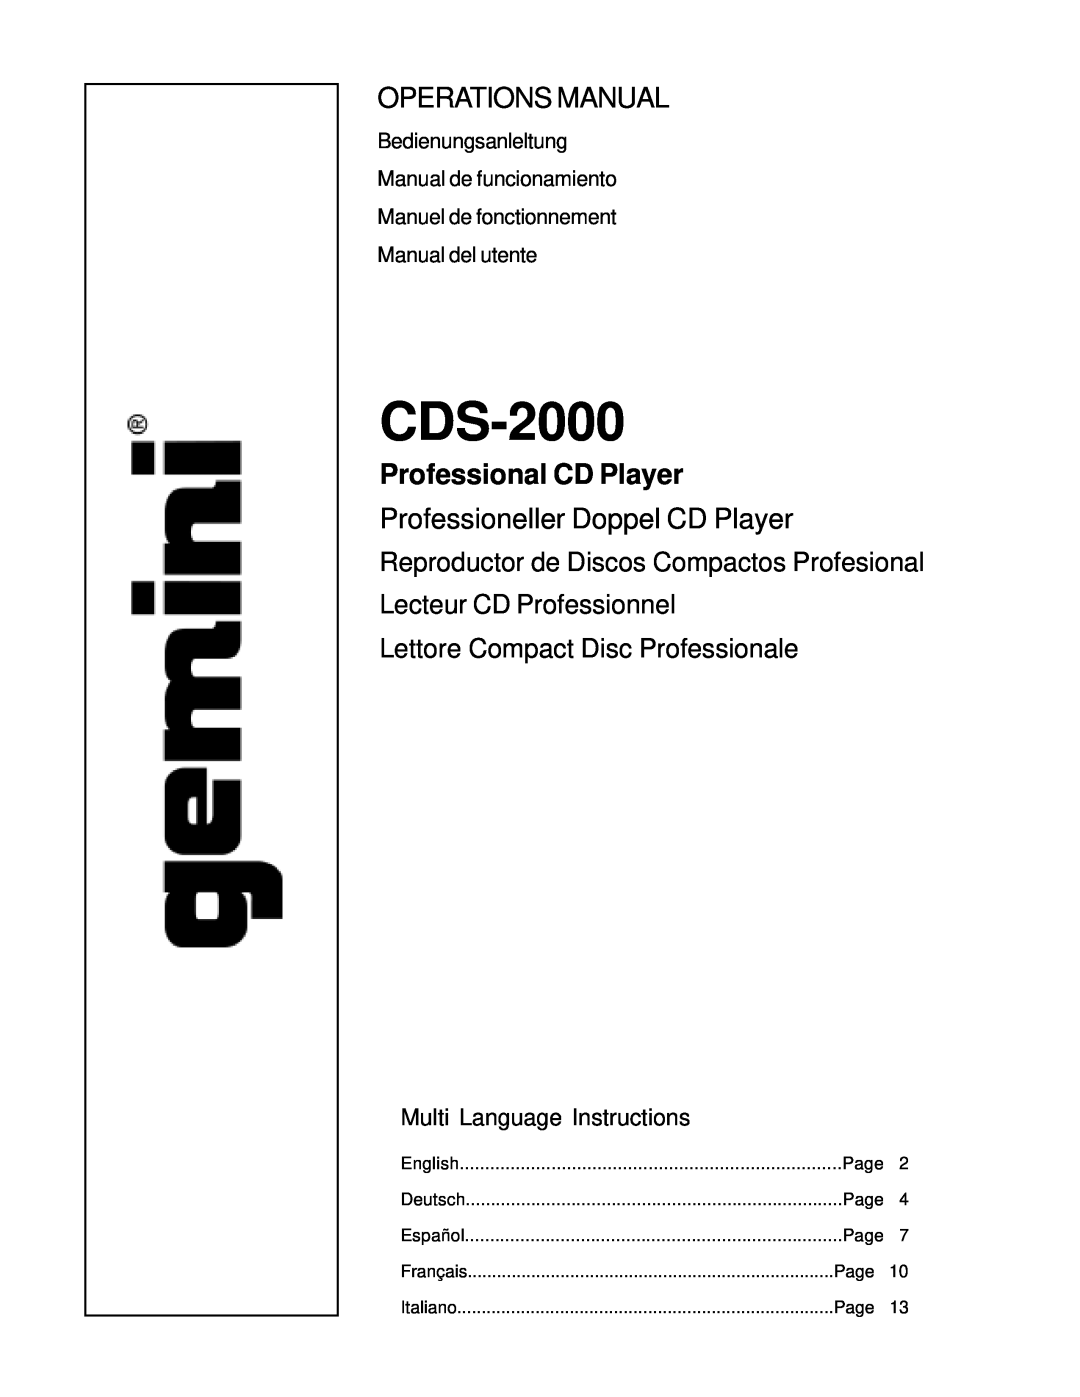 Gemini CDS-2000 manual Operations Manual, Professional CD Player, Professioneller Doppel CD Player 